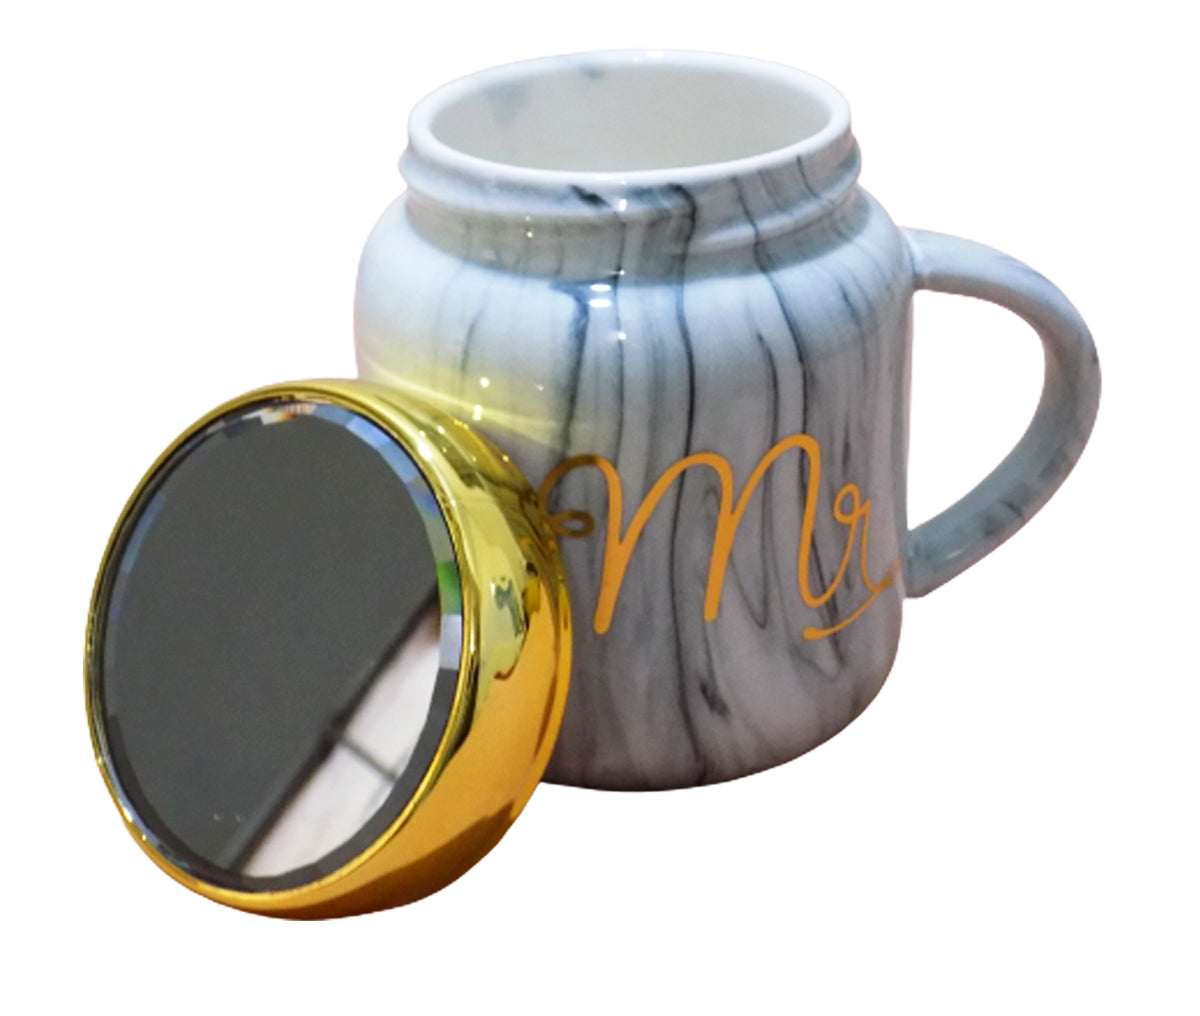 Mr. Coffee Mug with Glass Lid - The Perfect Gift for Coffee Lovers